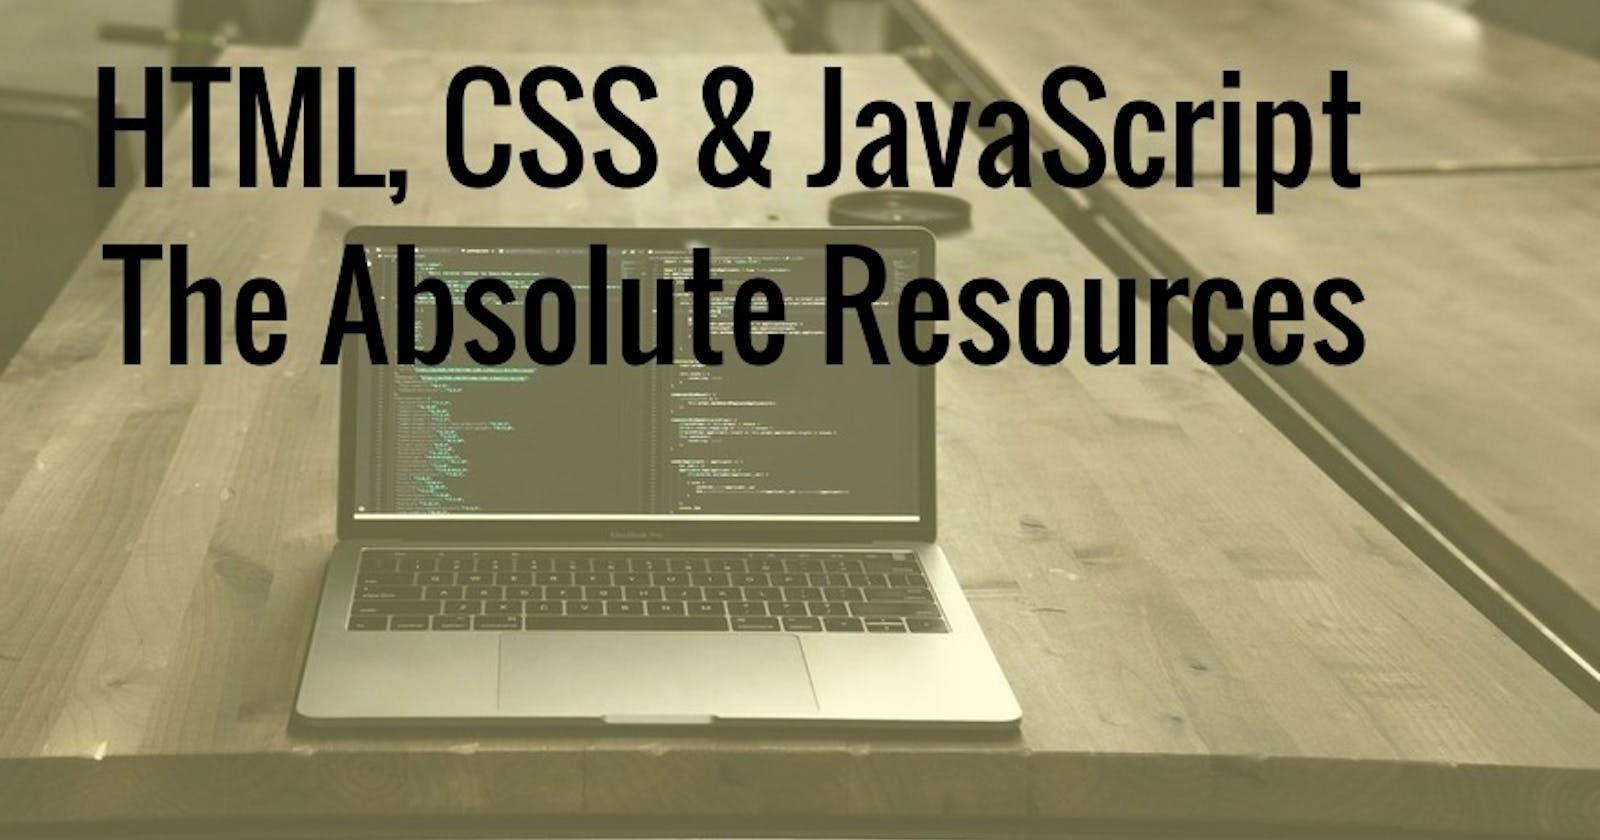 HTML, CSS & JavaScript: The Absolute Resources